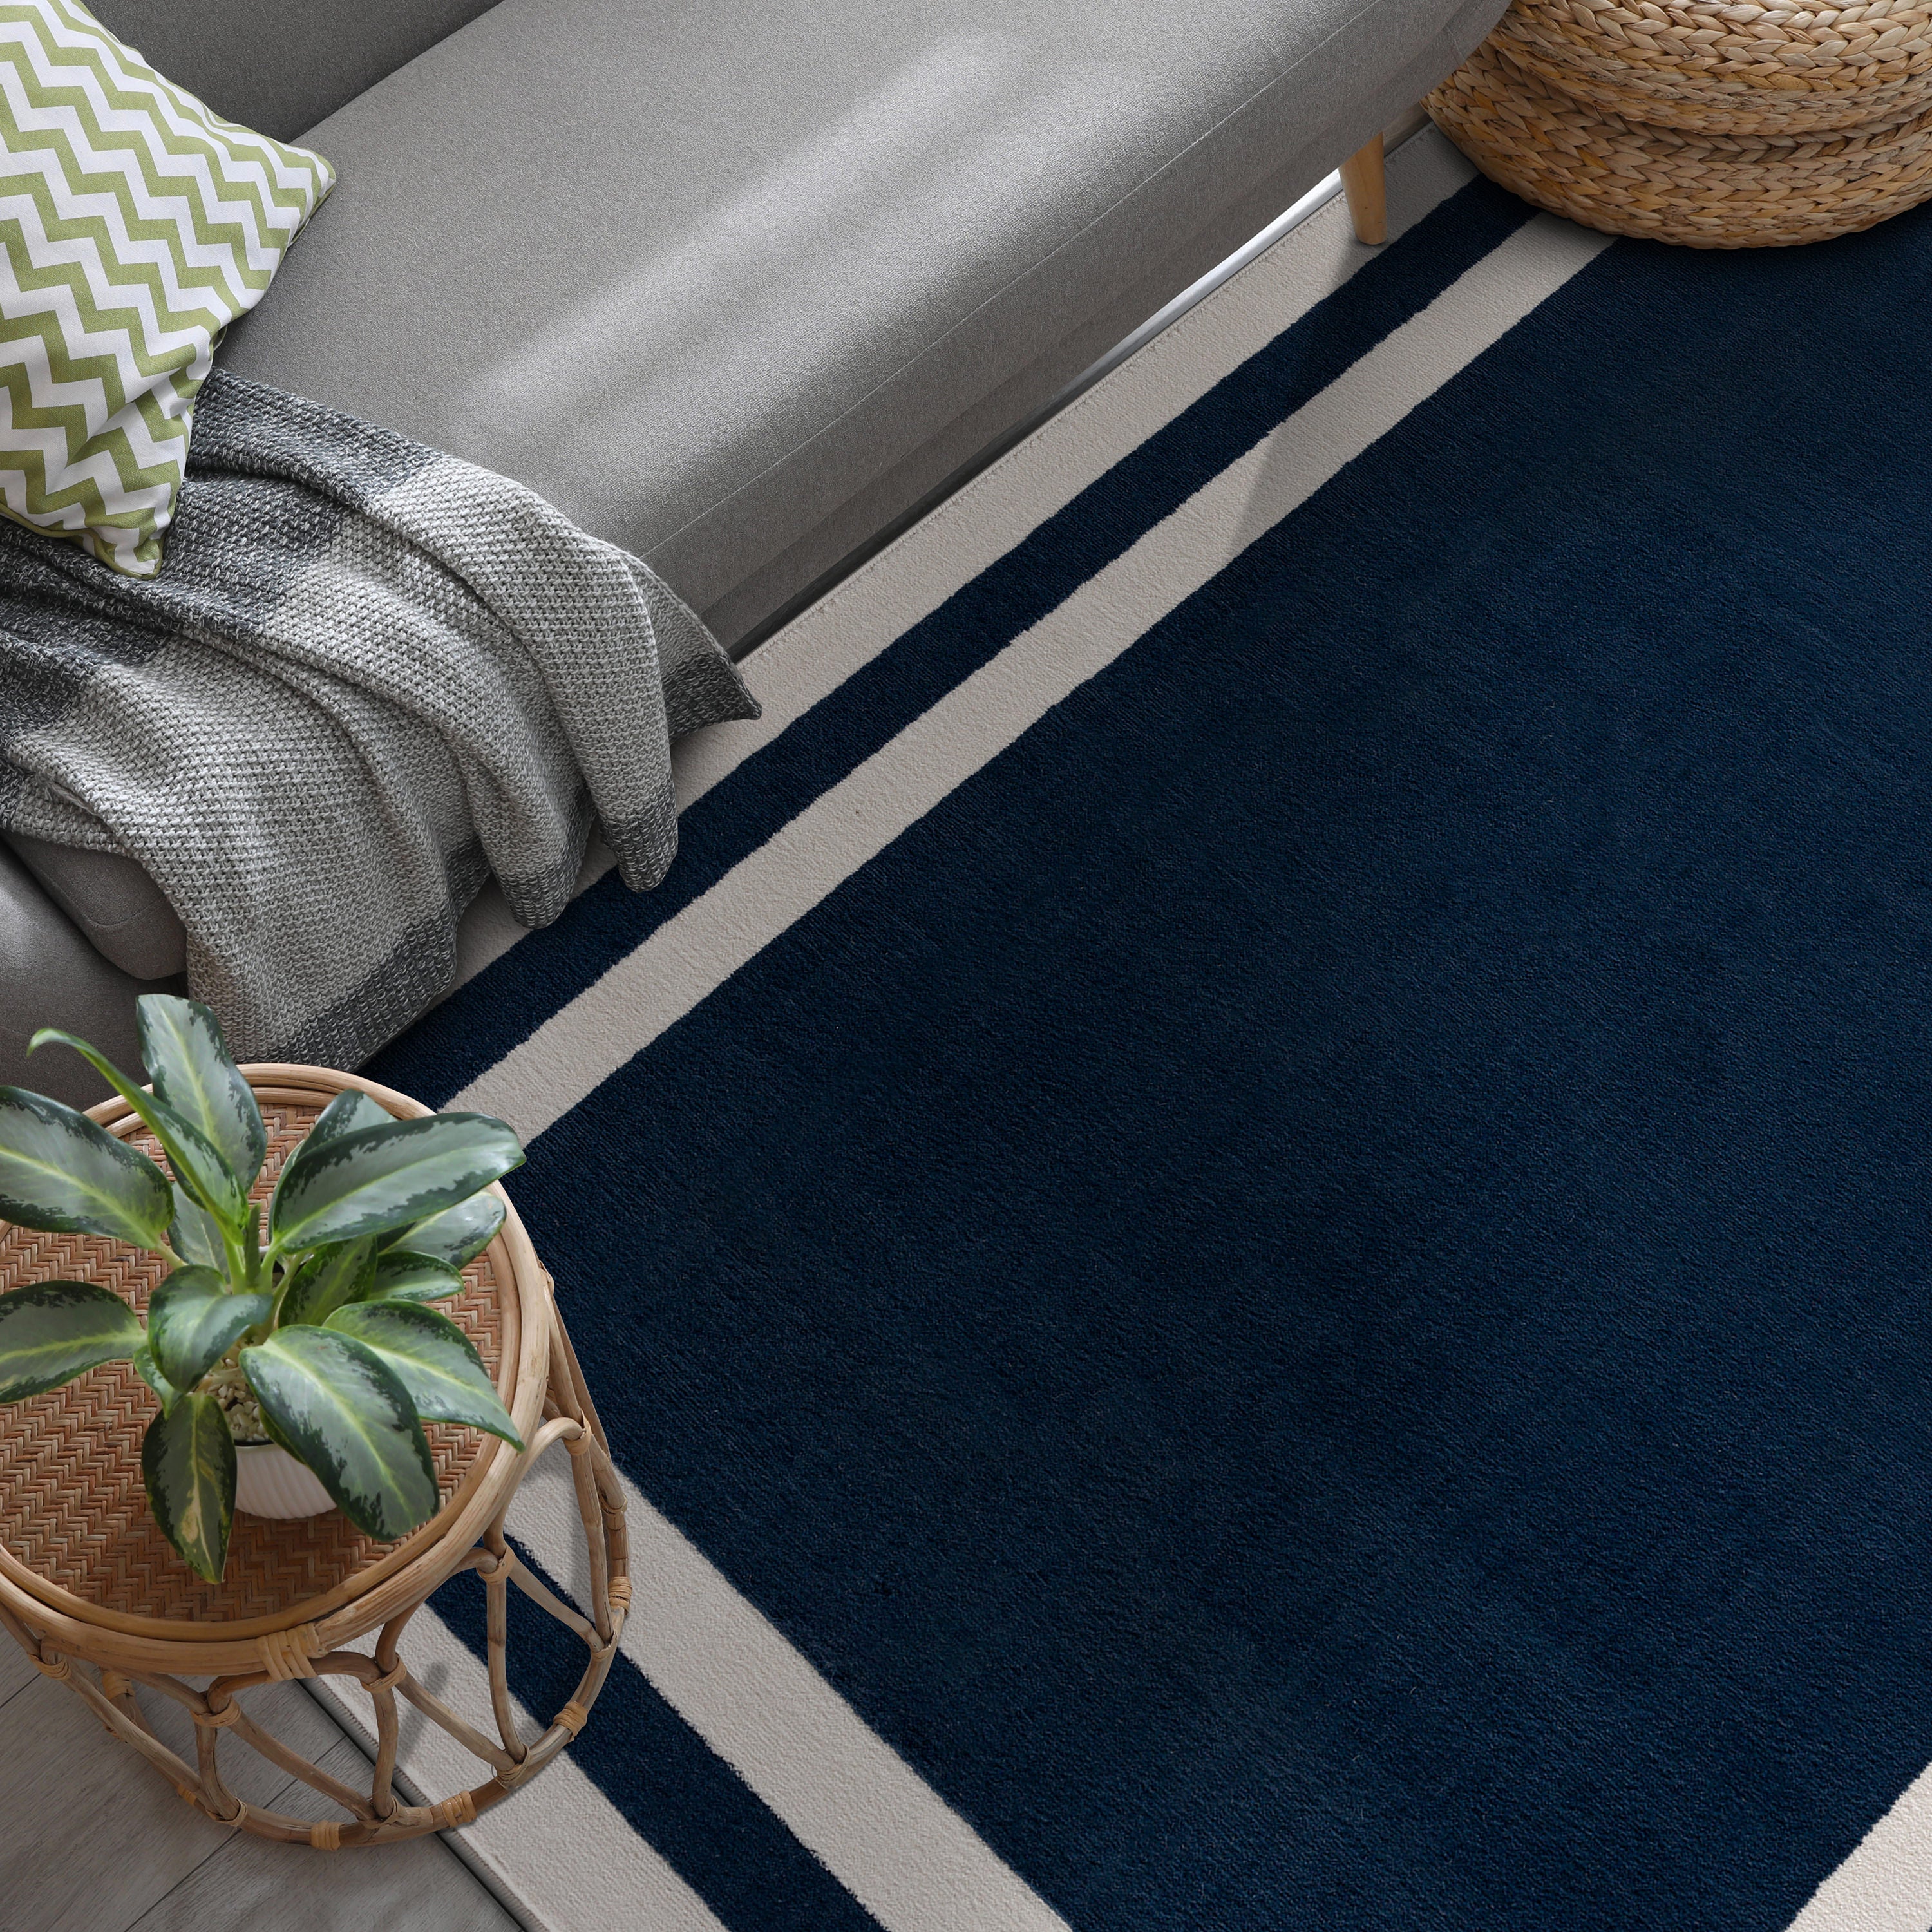 Crystal Bordered Area Rugs Navy Blue